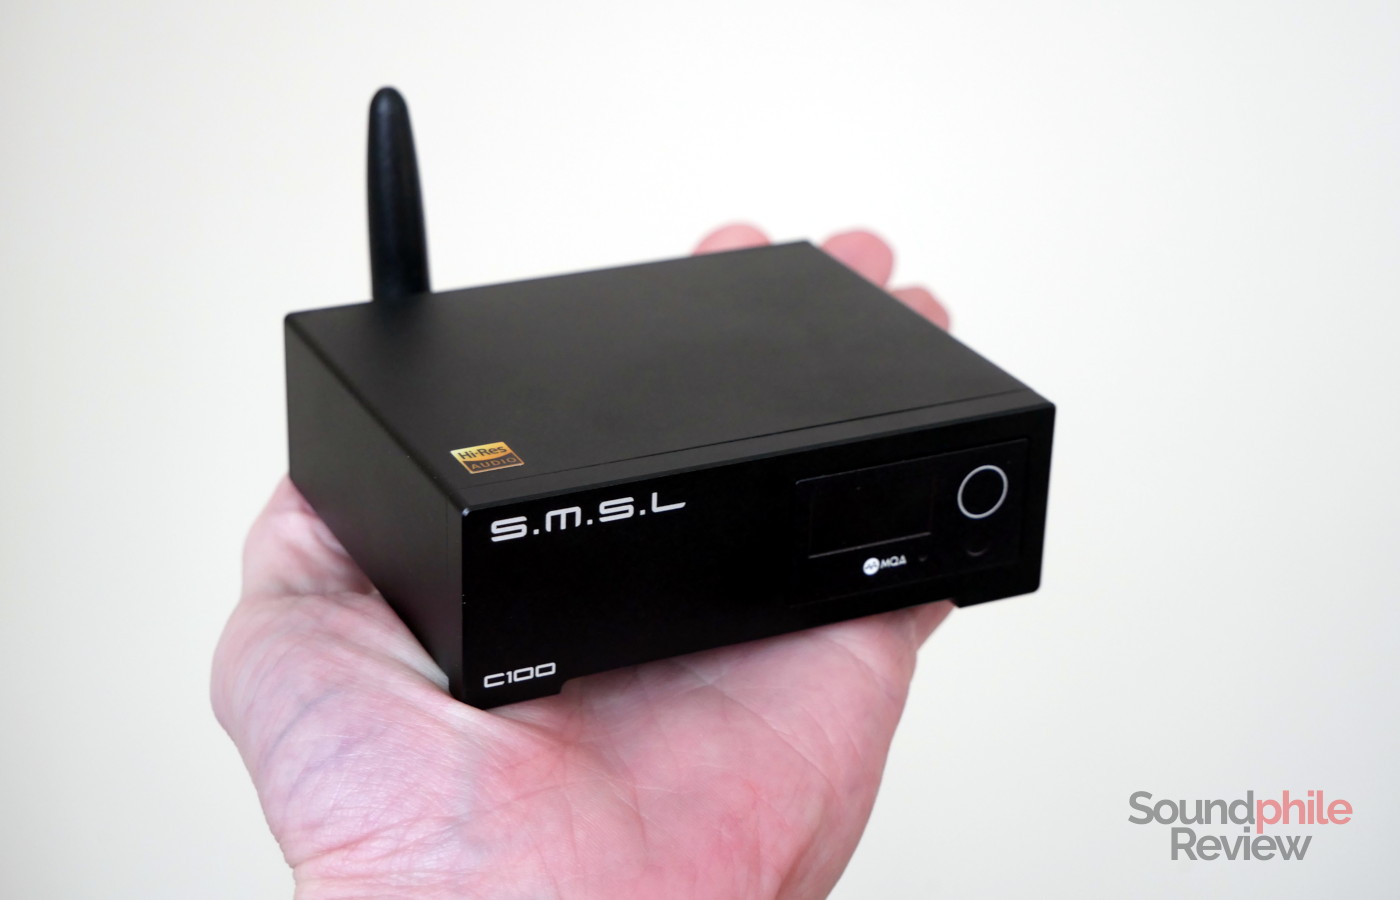 The SMSL C100 is so small it fits in your hand